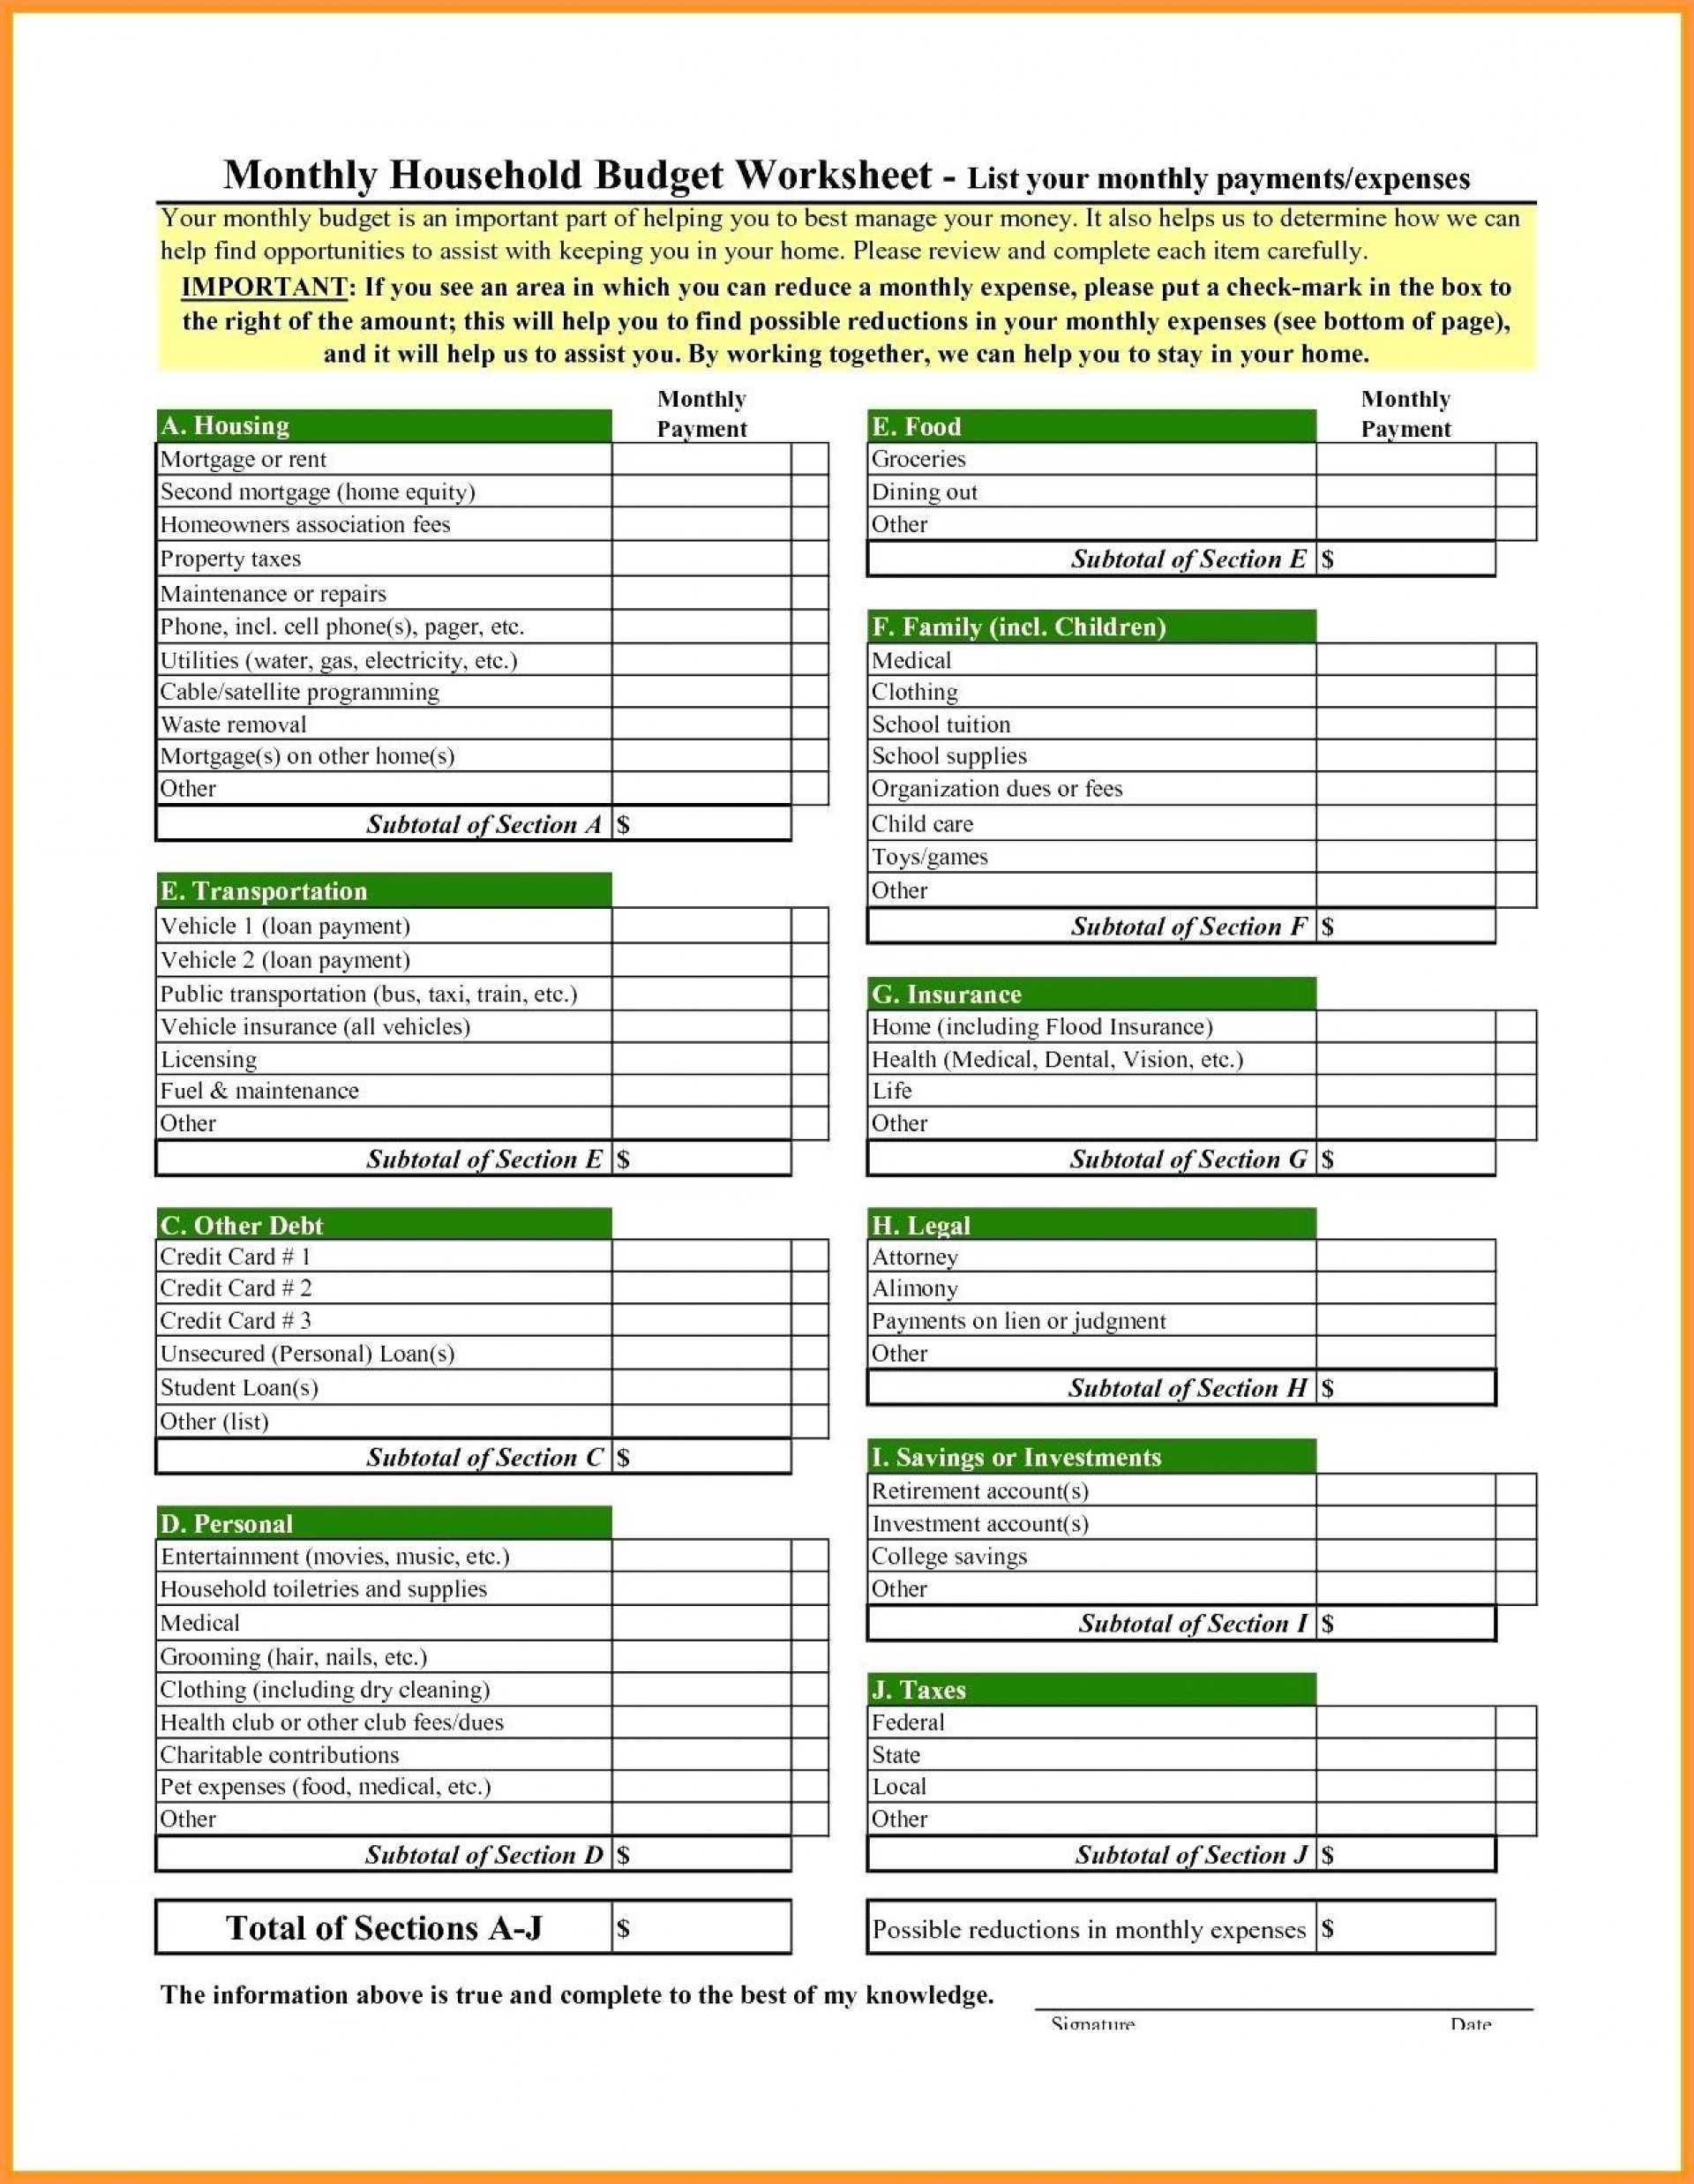 044 20Payment Tracking Sheet Excel Template Credit Card Loan Throughout Credit Card Interest Calculator Excel Template